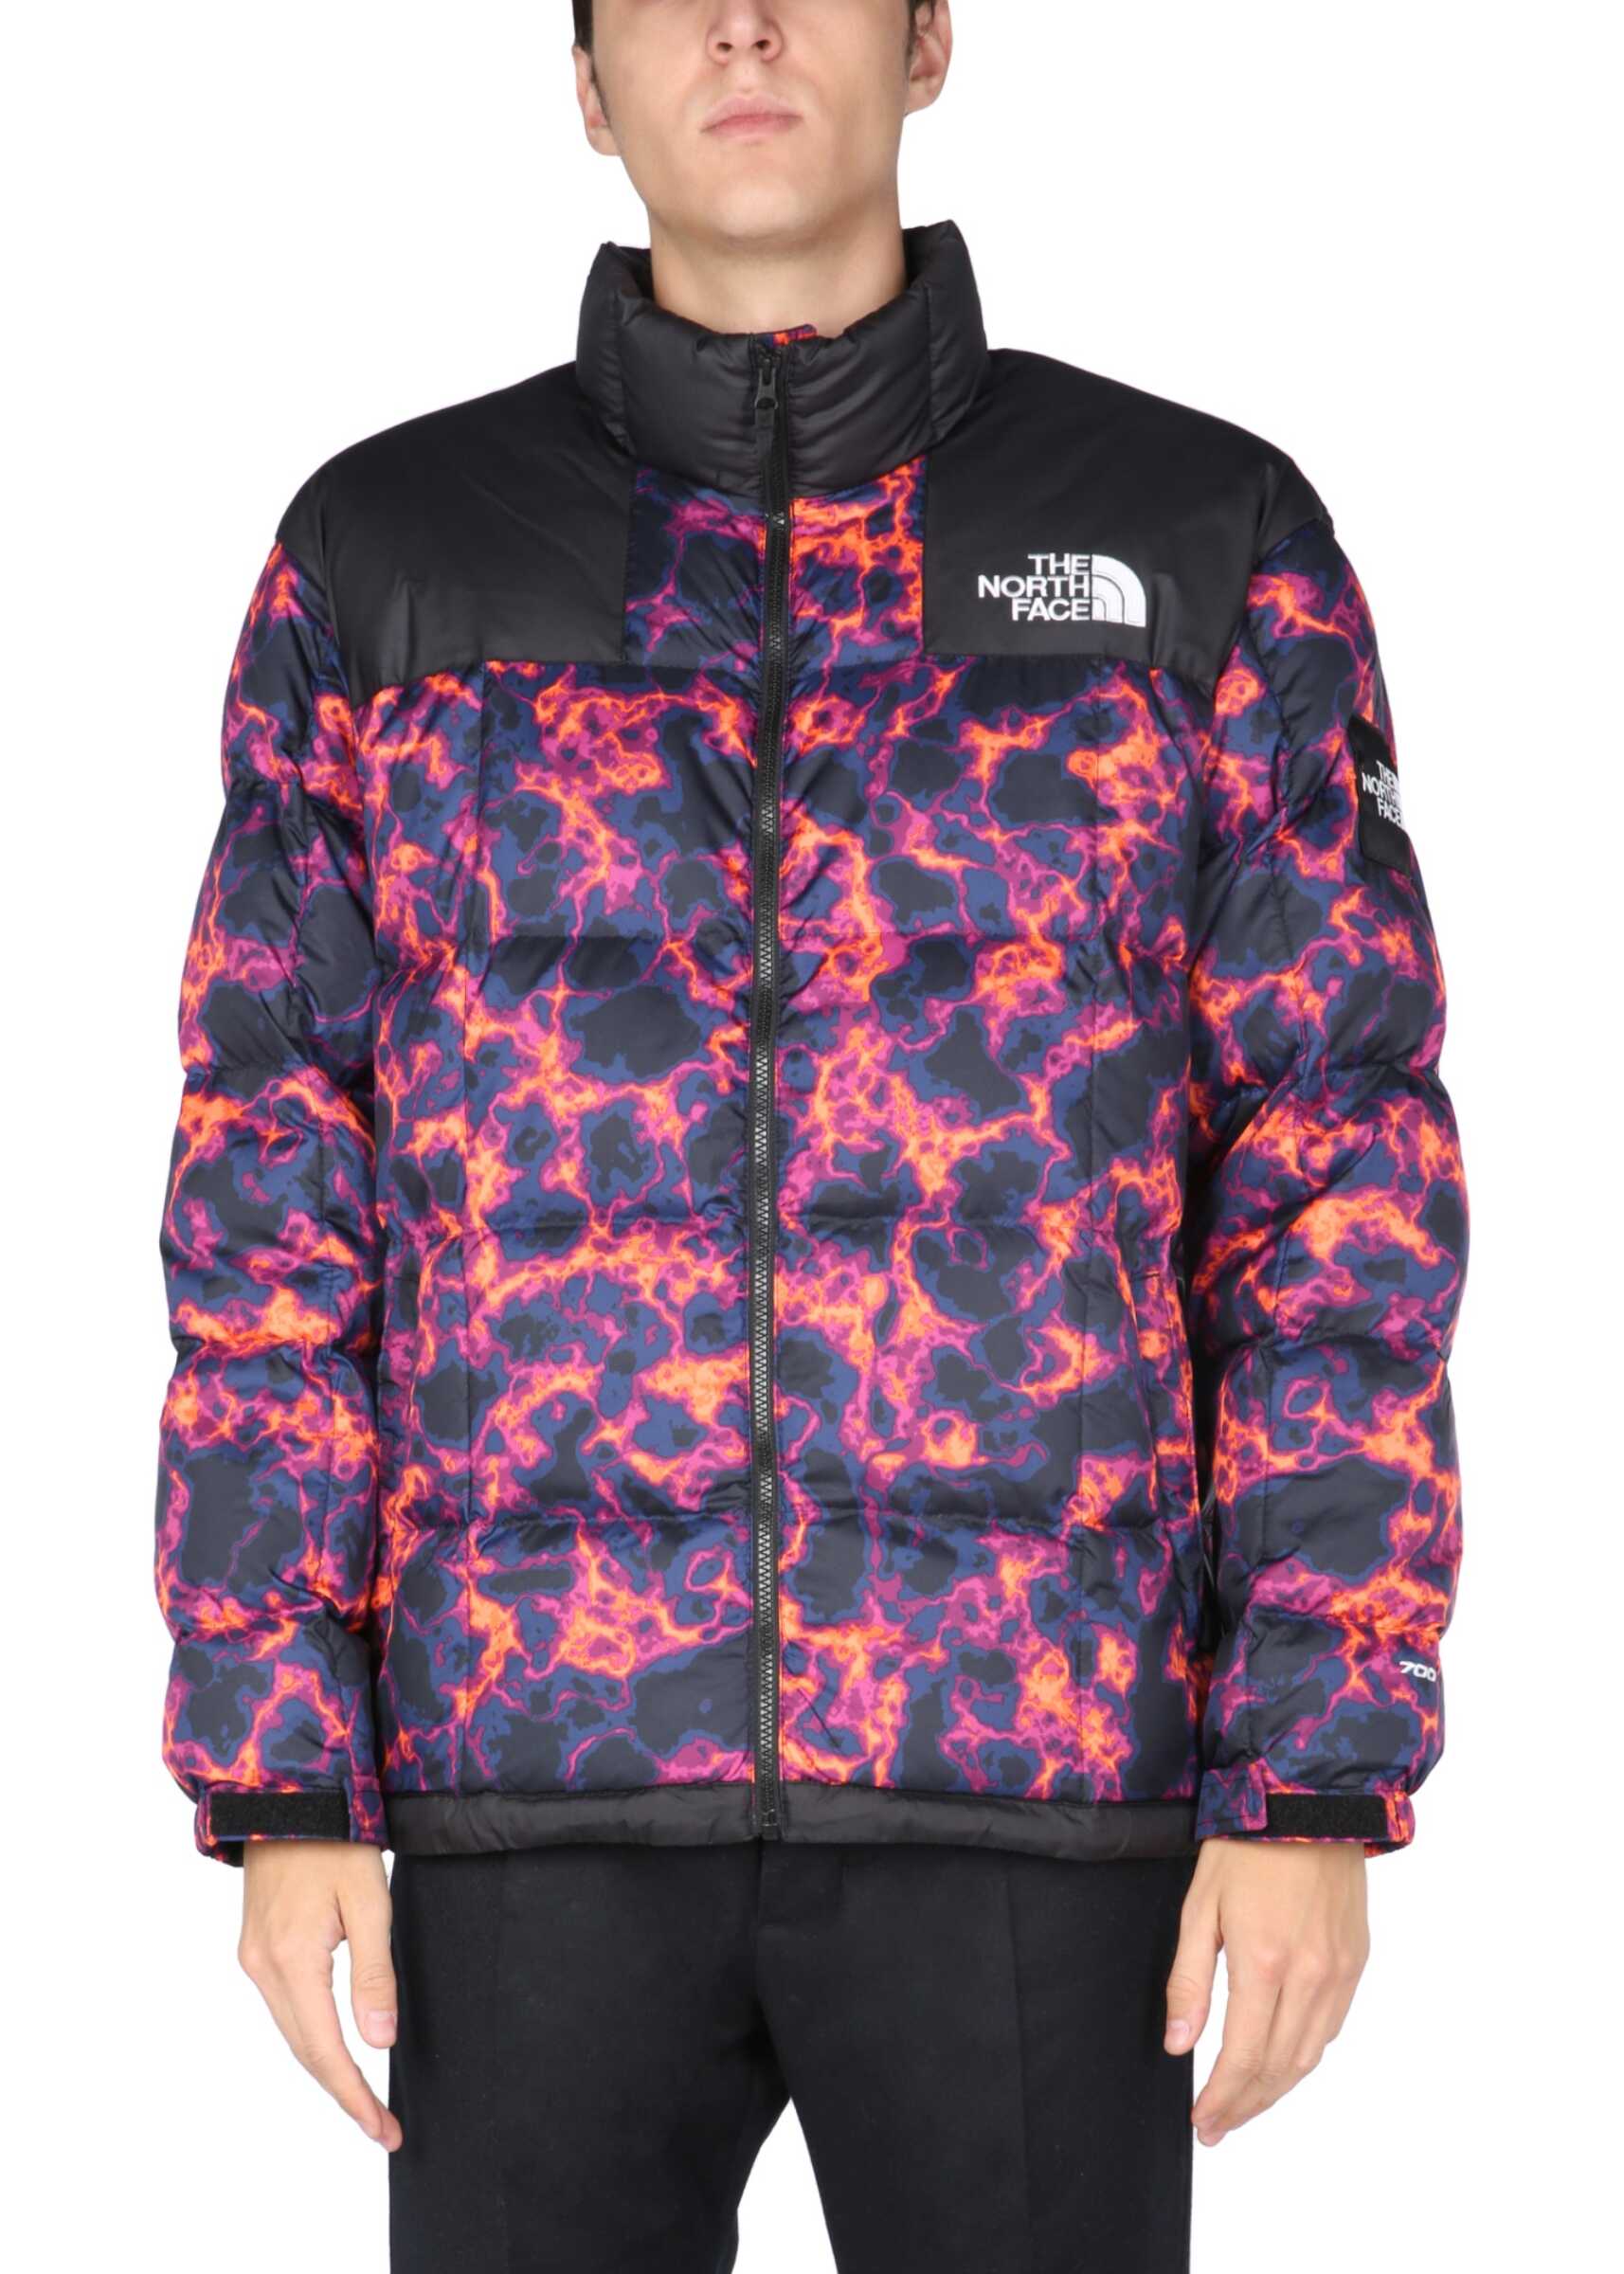 The North Face "Lhotse" Down Jacket NF0A3Y23_29K1 MULTICOLOUR